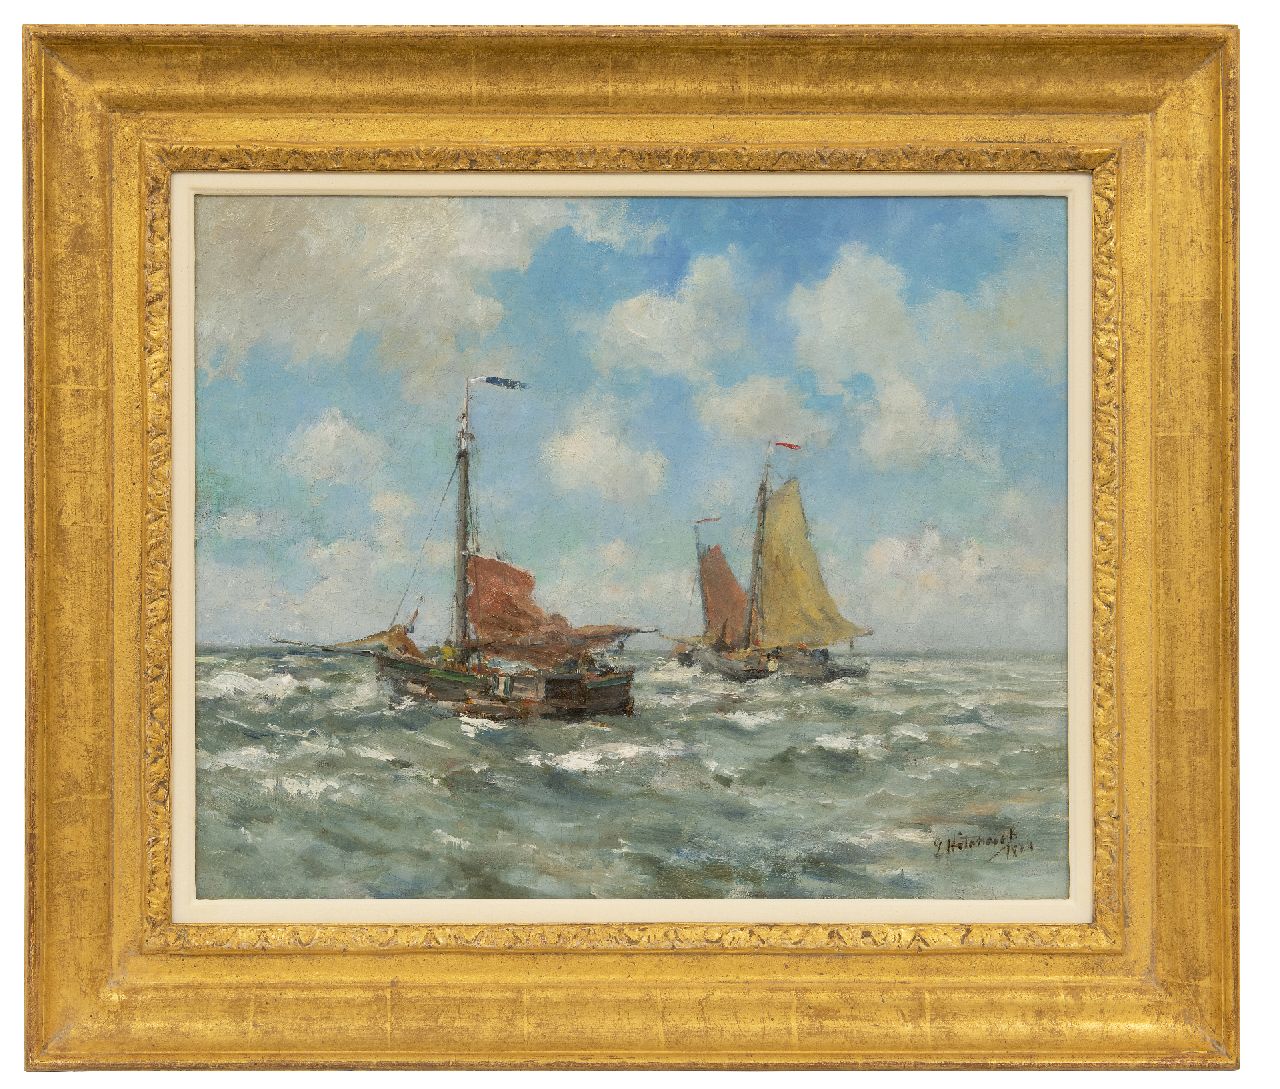 Hitchcock G.  | George Hitchcock | Paintings offered for sale | Fishing boats at Egmond, oil on canvas 40.7 x 51.0 cm, signed l.r. and dated 1884